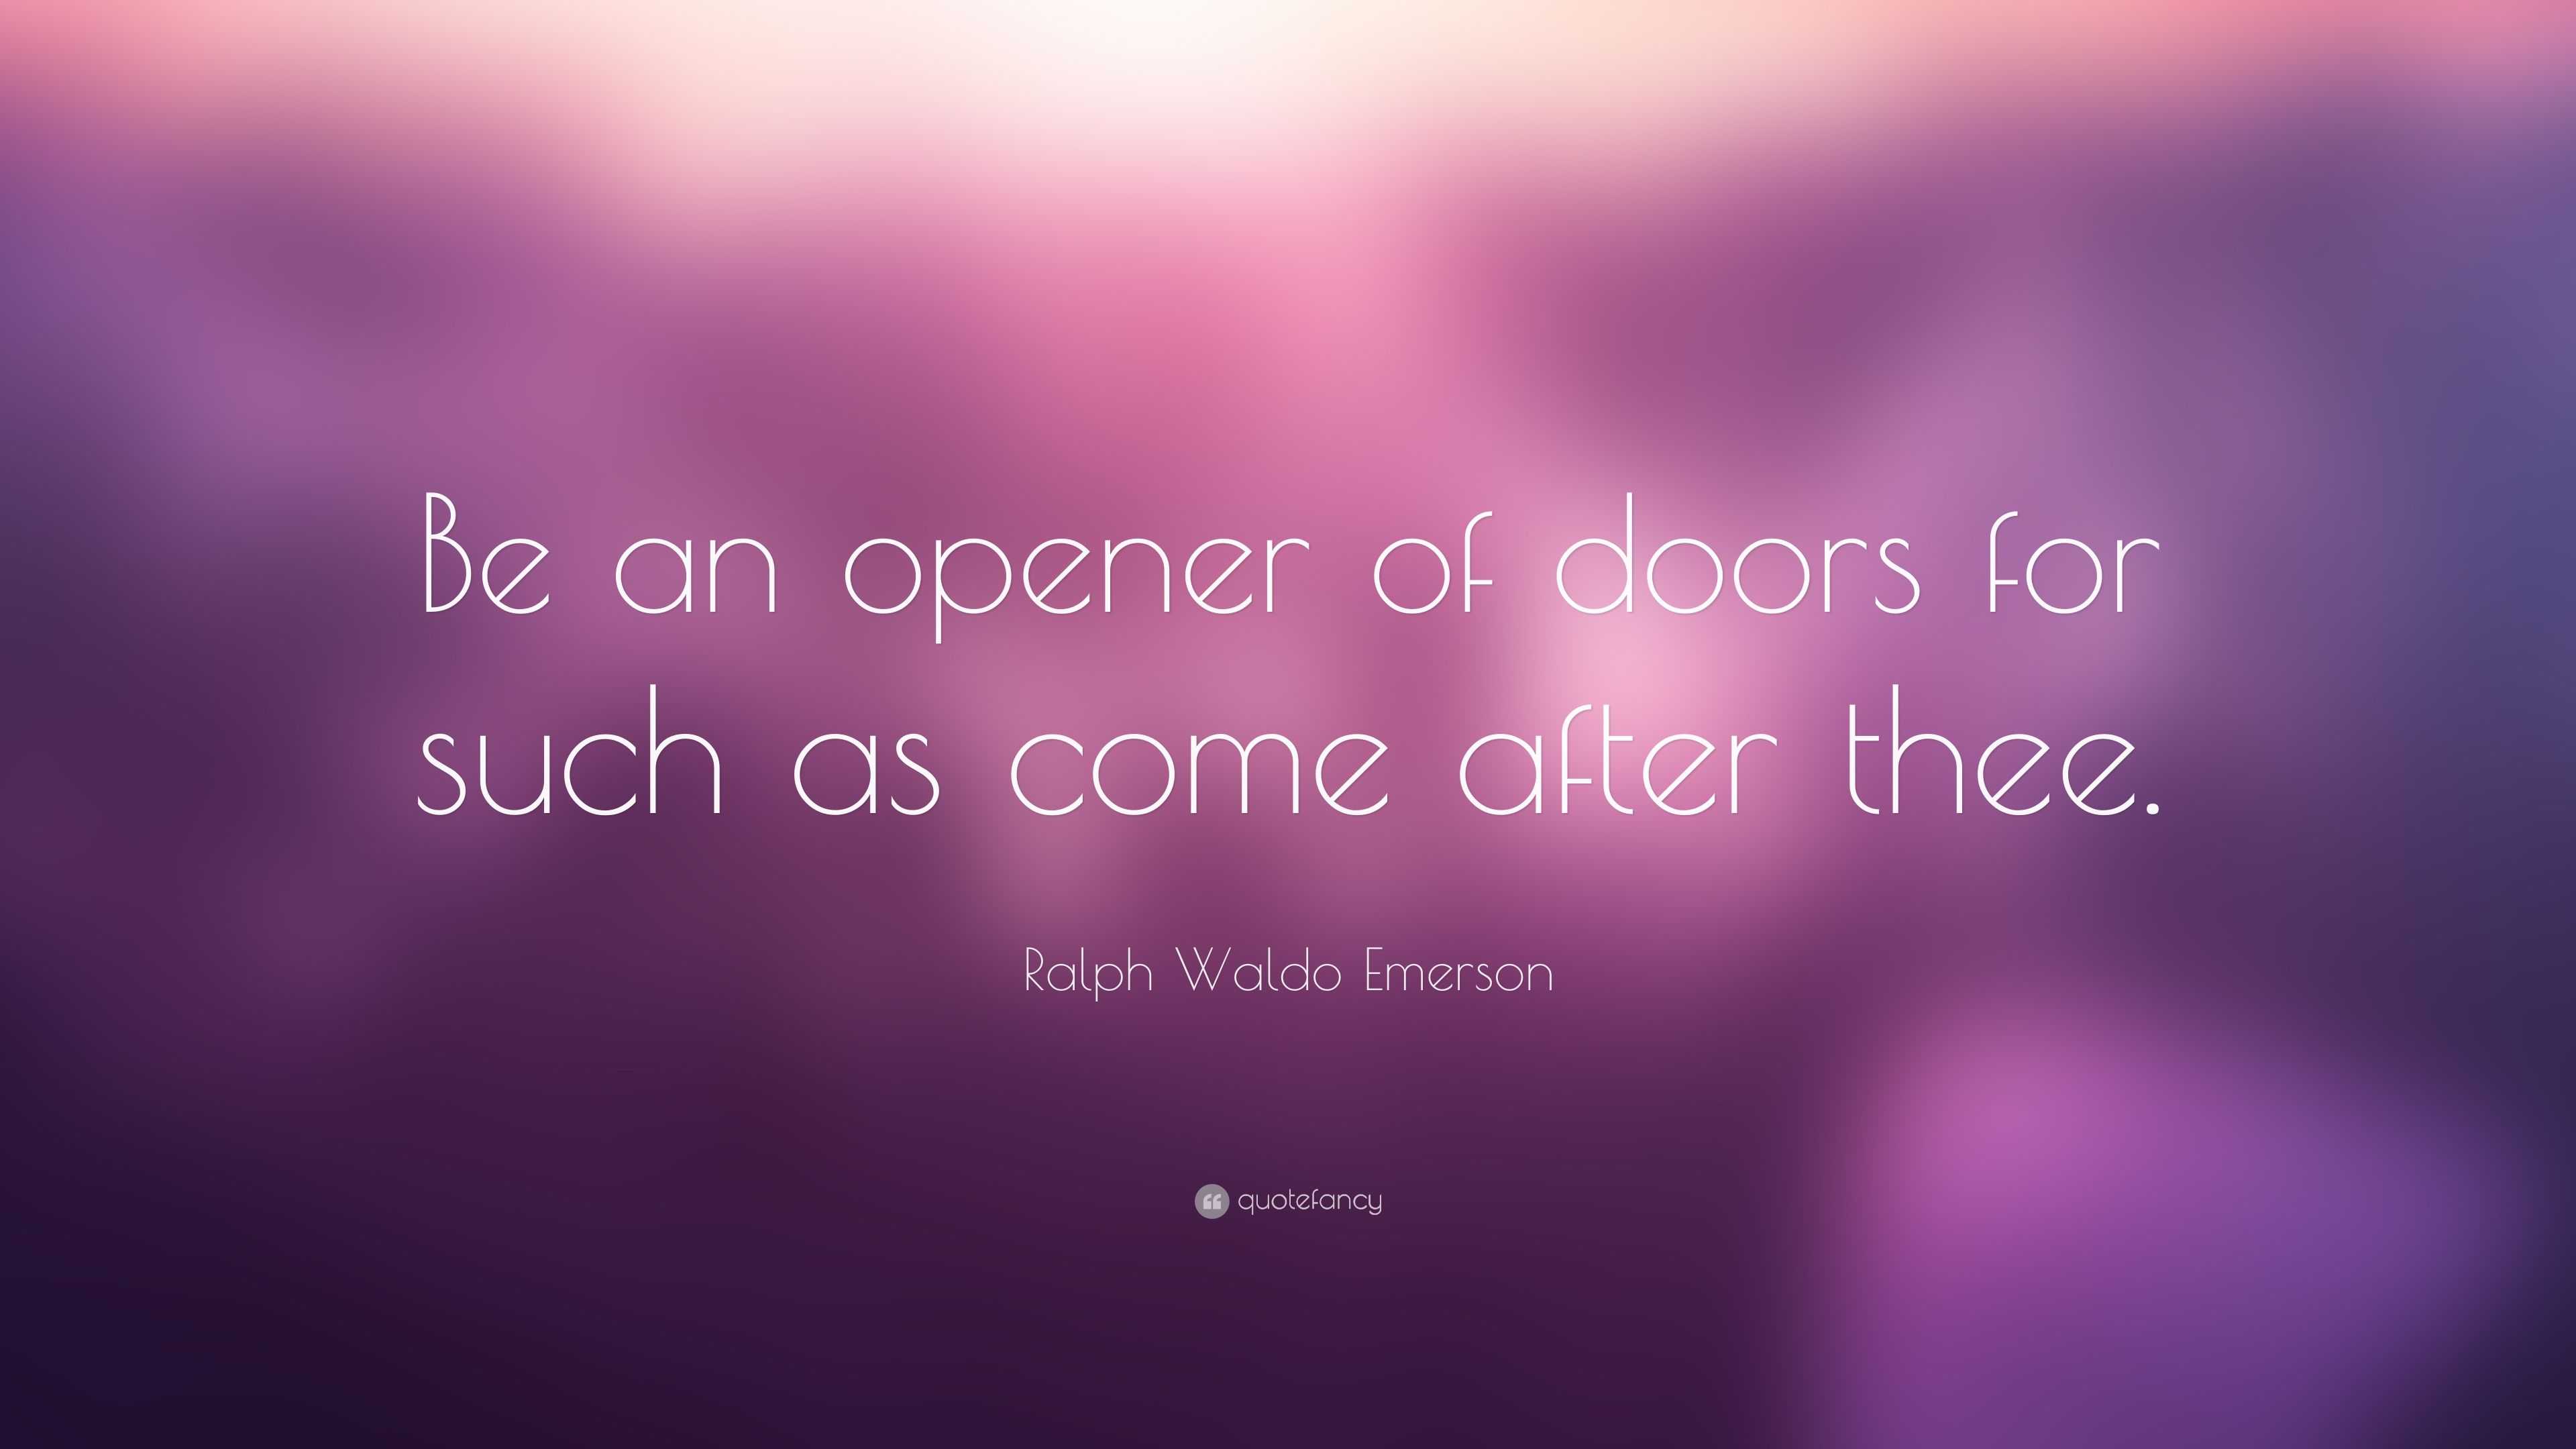 https://quotefancy.com/media/wallpaper/3840x2160/3719374-Ralph-Waldo-Emerson-Quote-Be-an-opener-of-doors-for-such-as-come.jpg